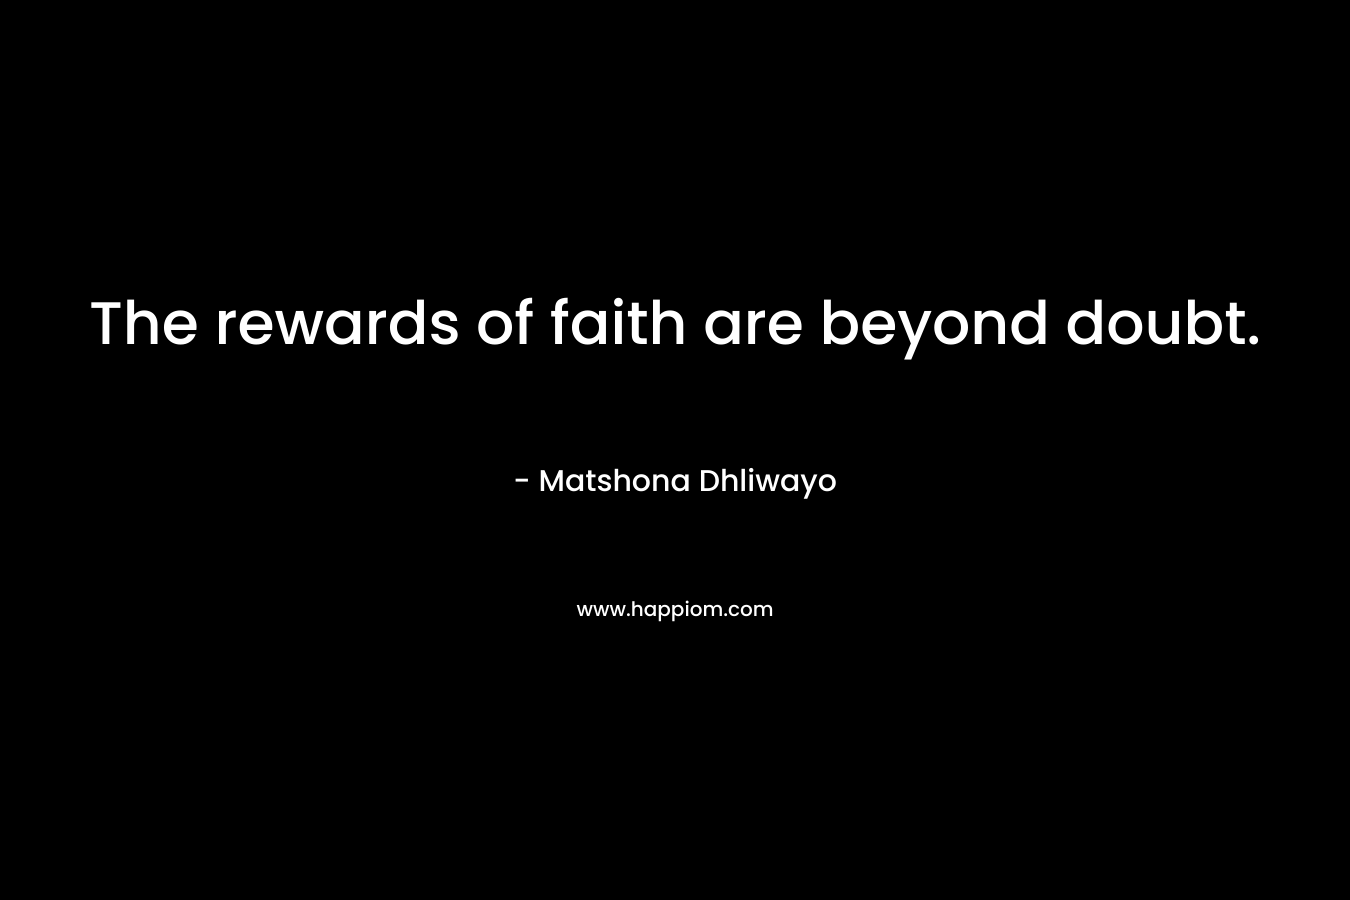 The rewards of faith are beyond doubt.